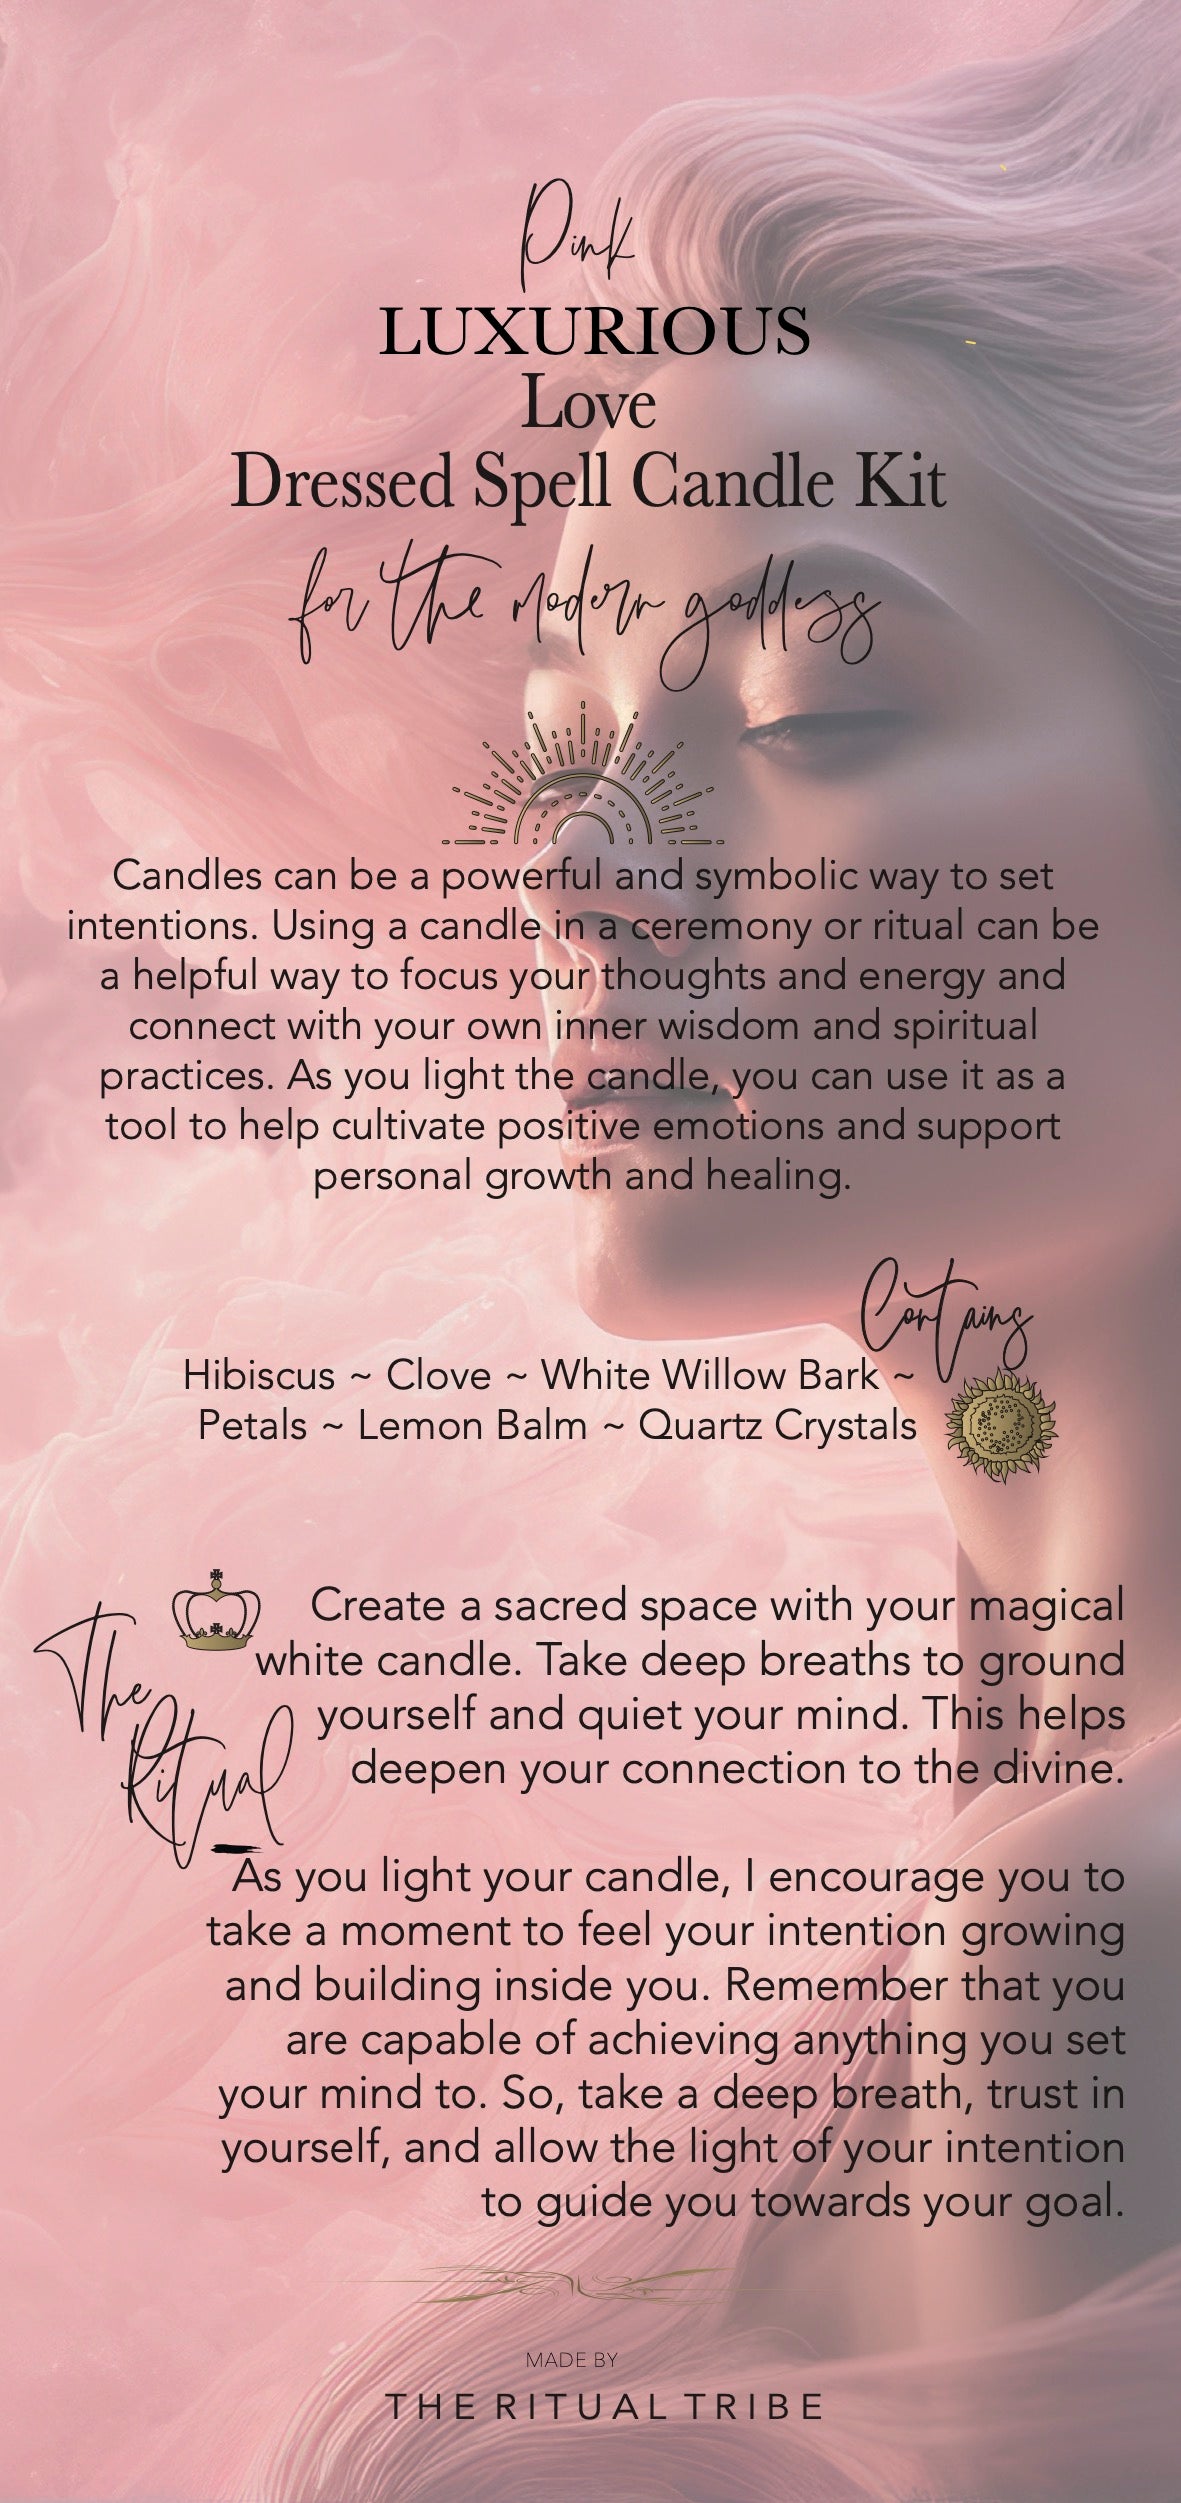 Pink Love Dressed Spell Candle Kit | For the Modern Goddess